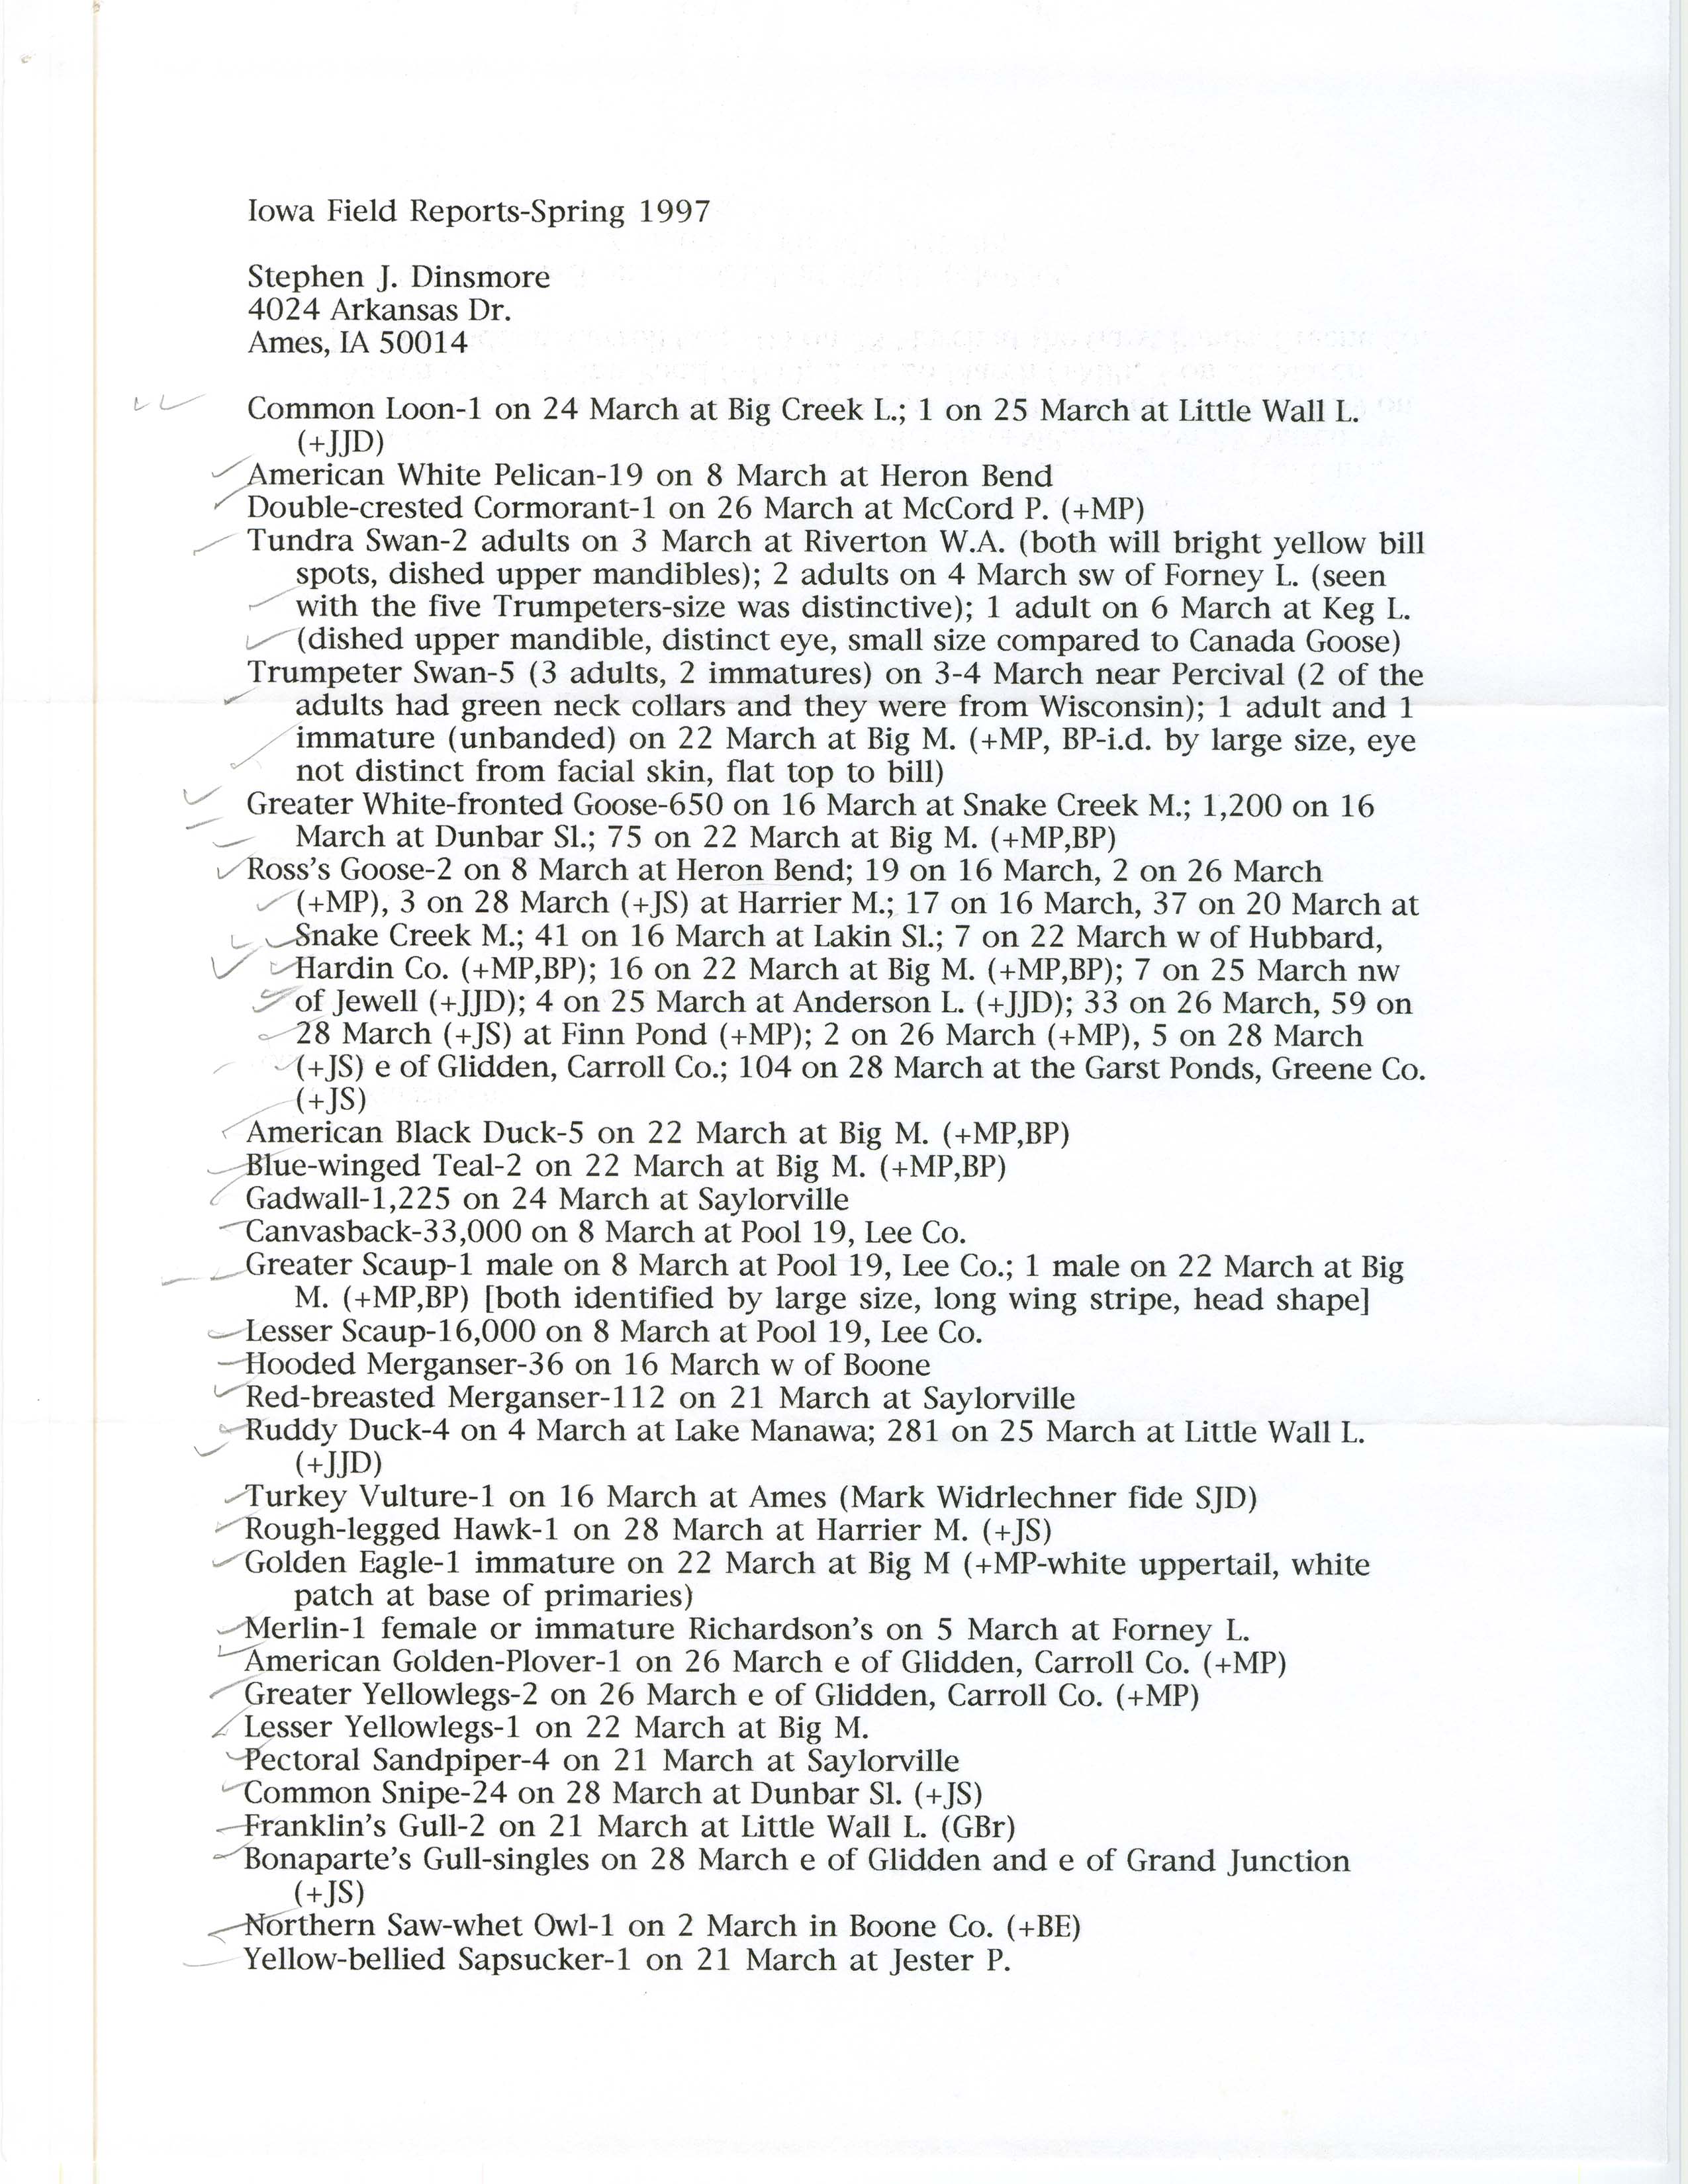 Field notes contributed by Stephen J. Dinsmore, spring 1997